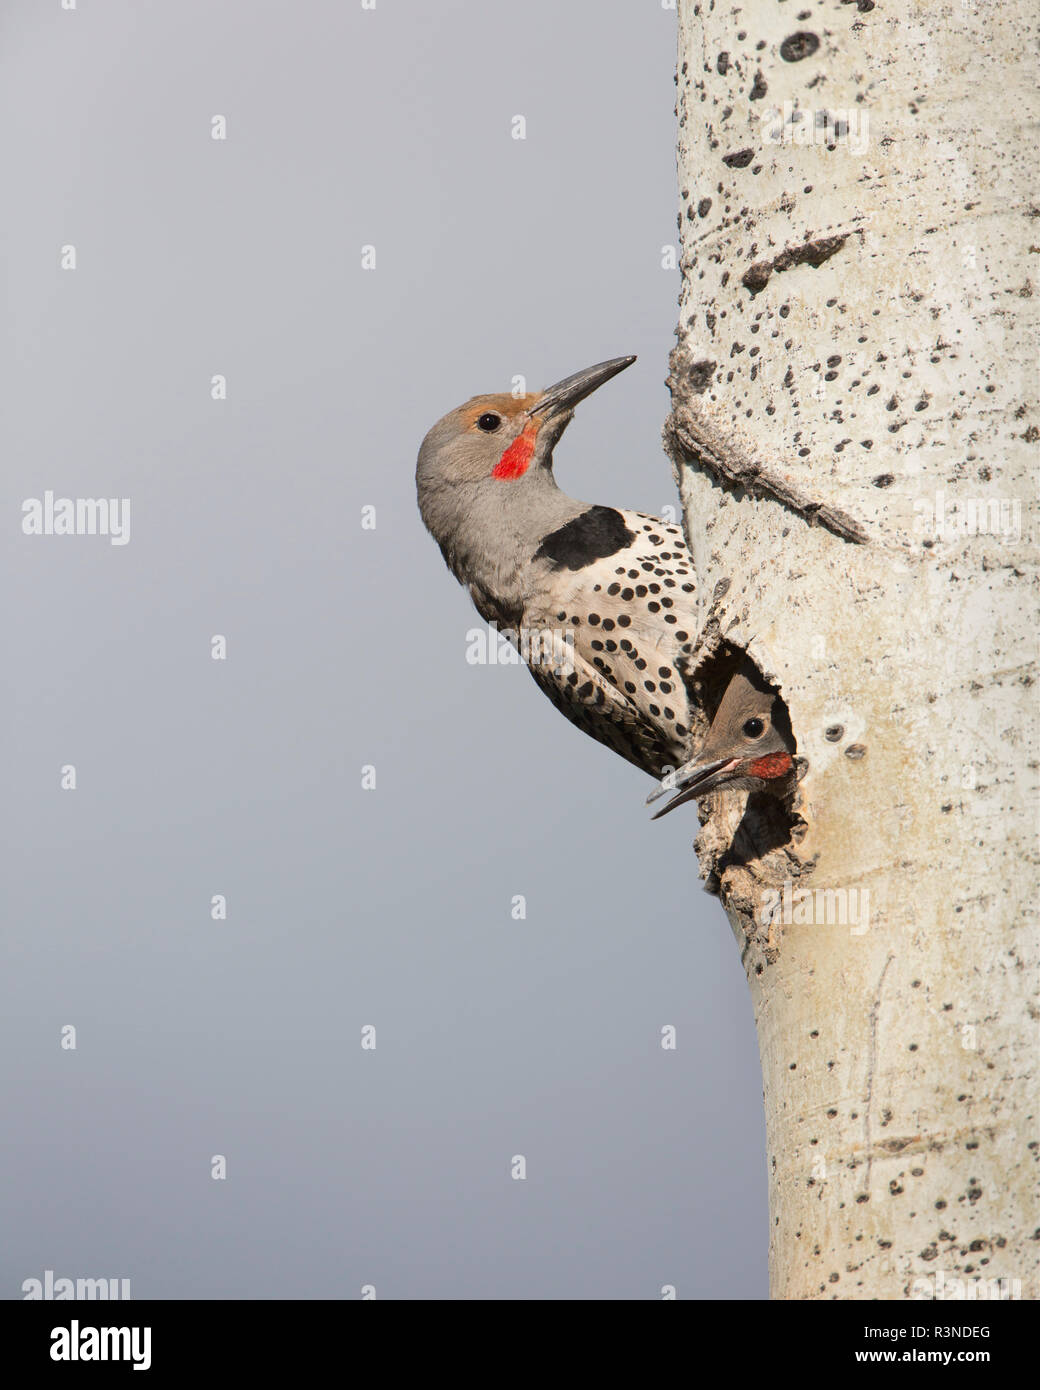 Canada, British Columbia. Adult male Northern Flicker (Colaptes auratus) at nest hole with male chick. Stock Photo